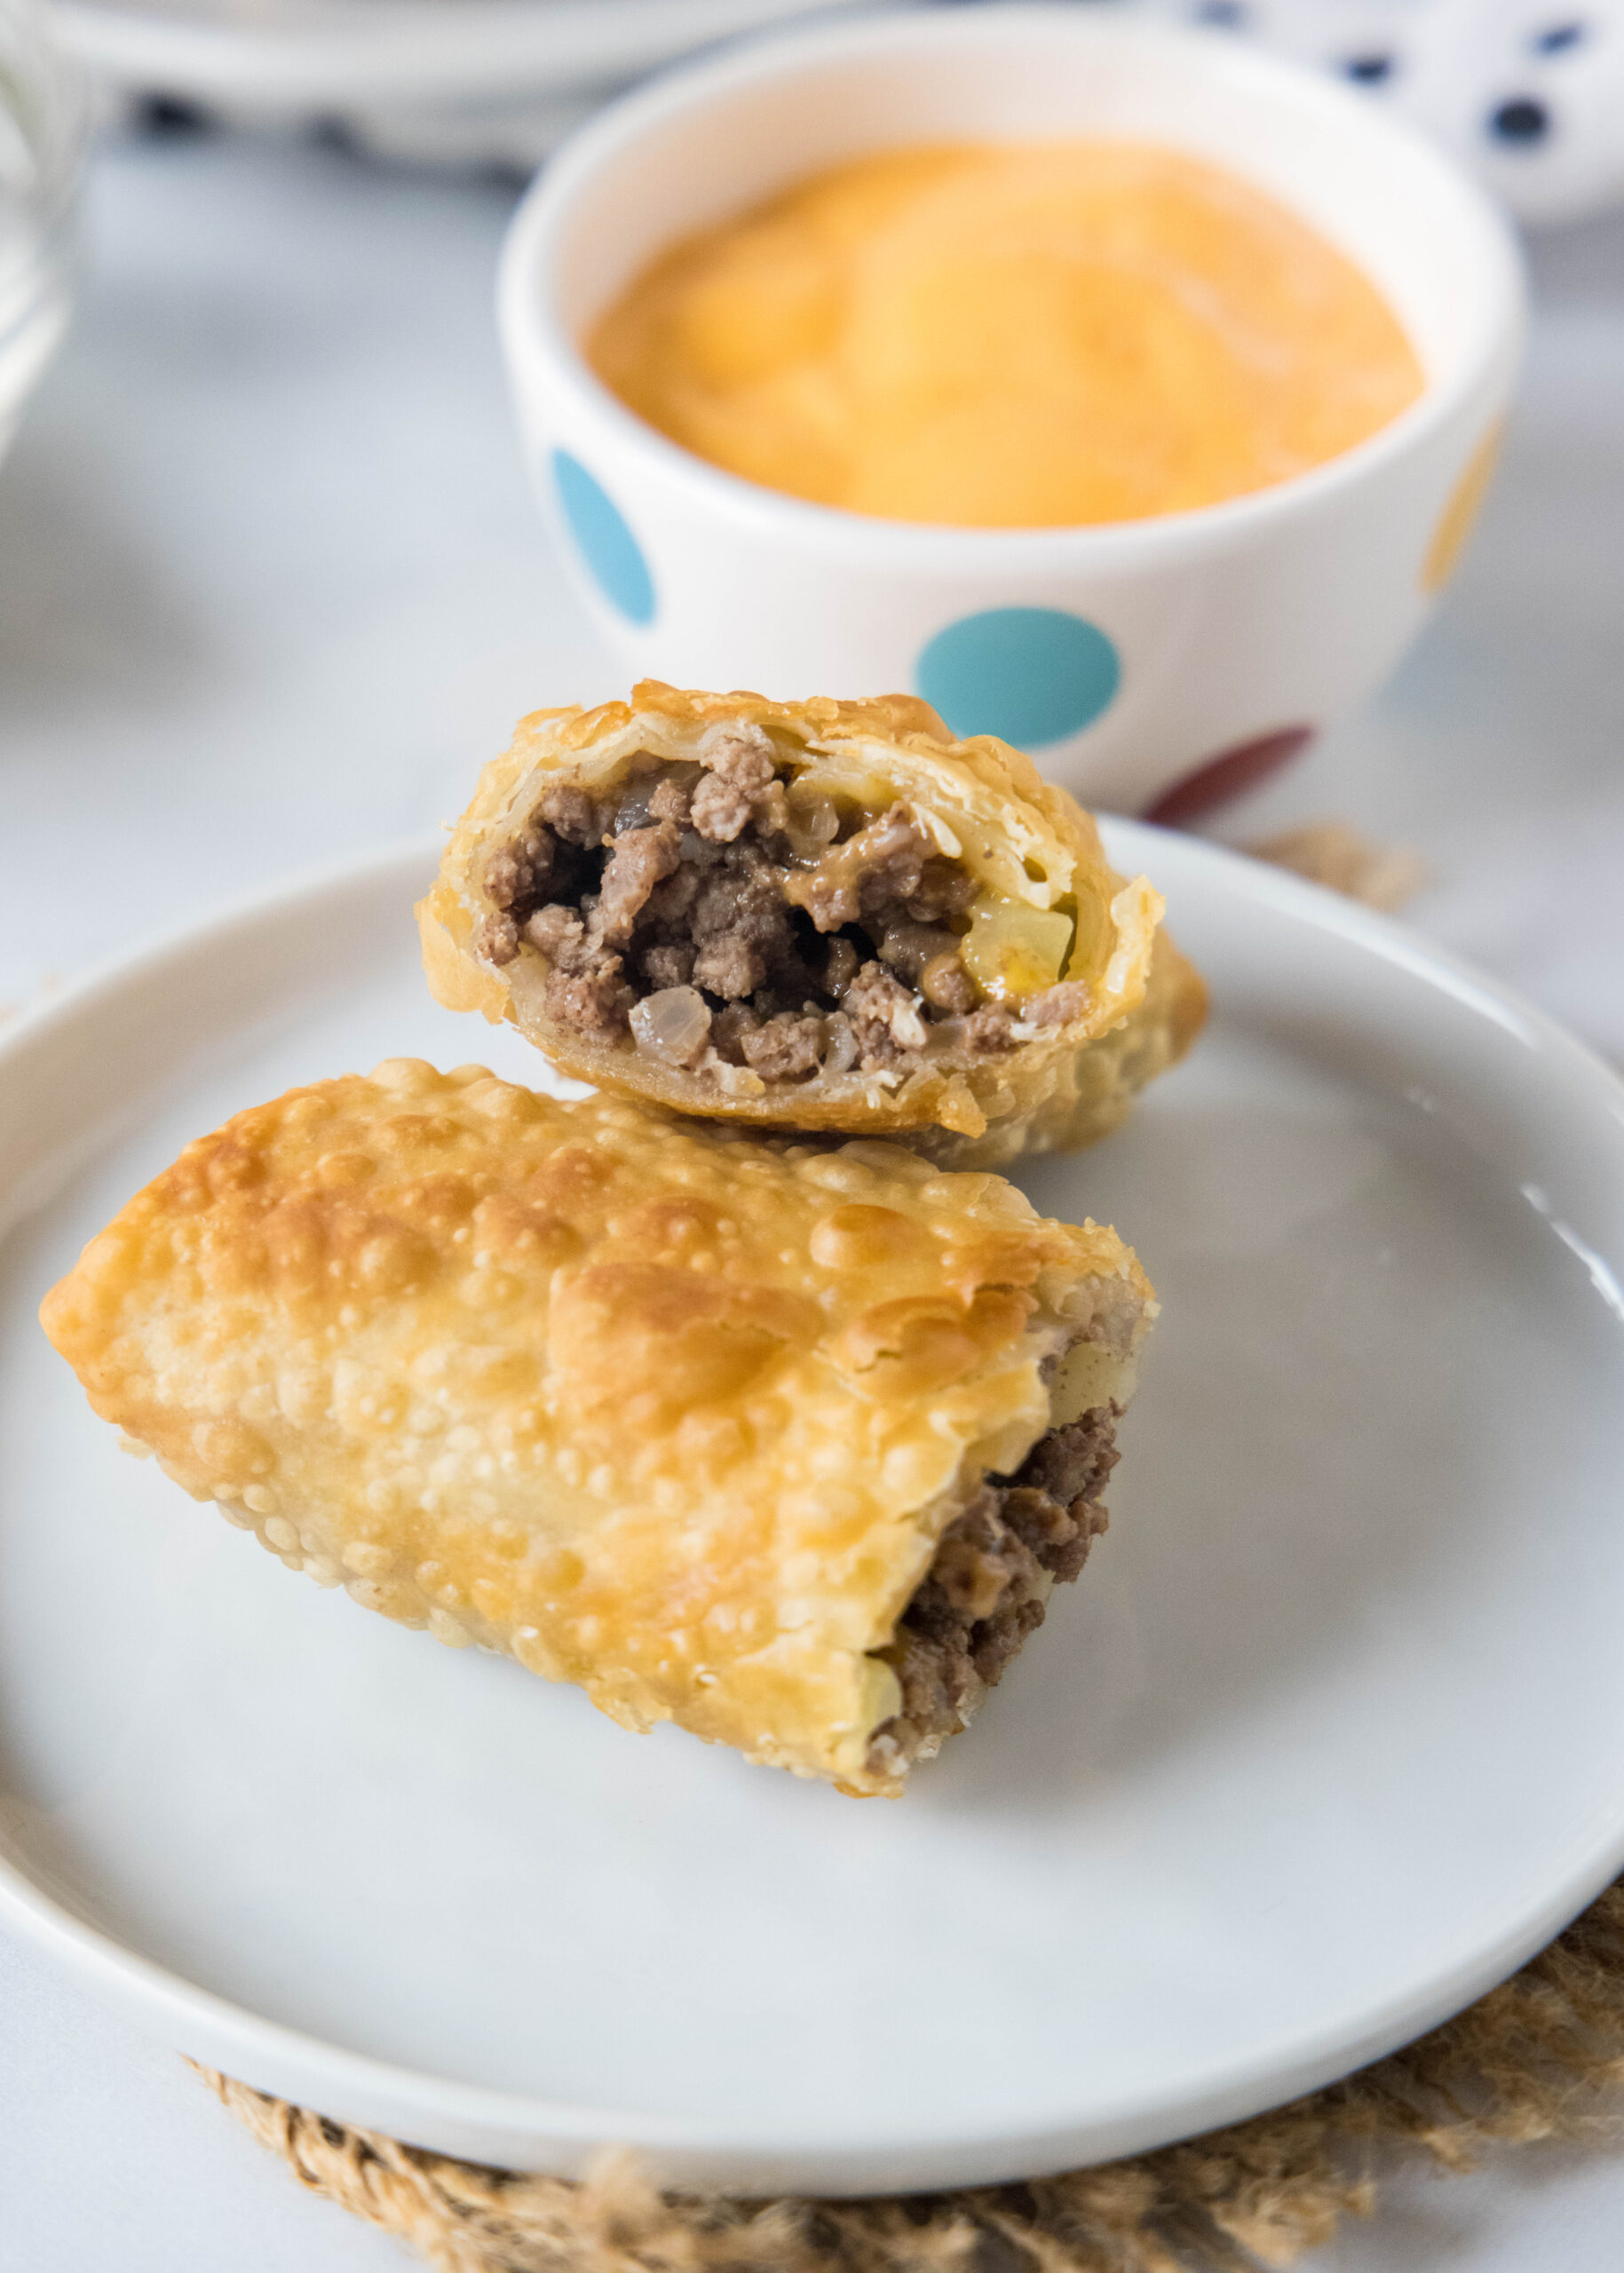 Two halves of a cheeseburger egg roll stacked on a white plate with a bowl of dipping sauce in the background.